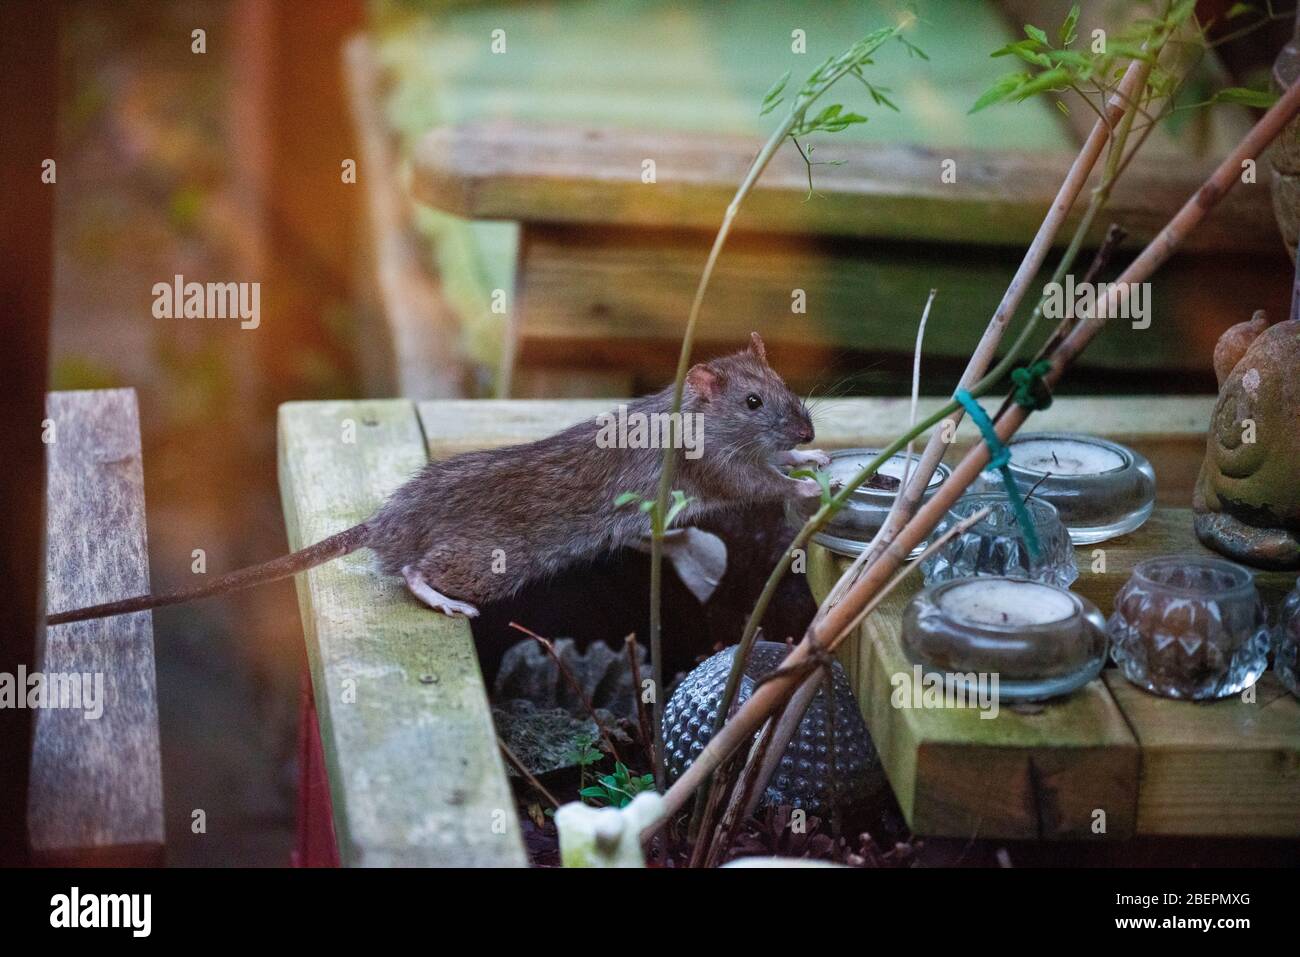 Thaxted Essex England. Brown Rat in photographers garden. April 2020 Wikipedia below: The brown rat (Rattus norvegicus), also known as the common rat, Stock Photo